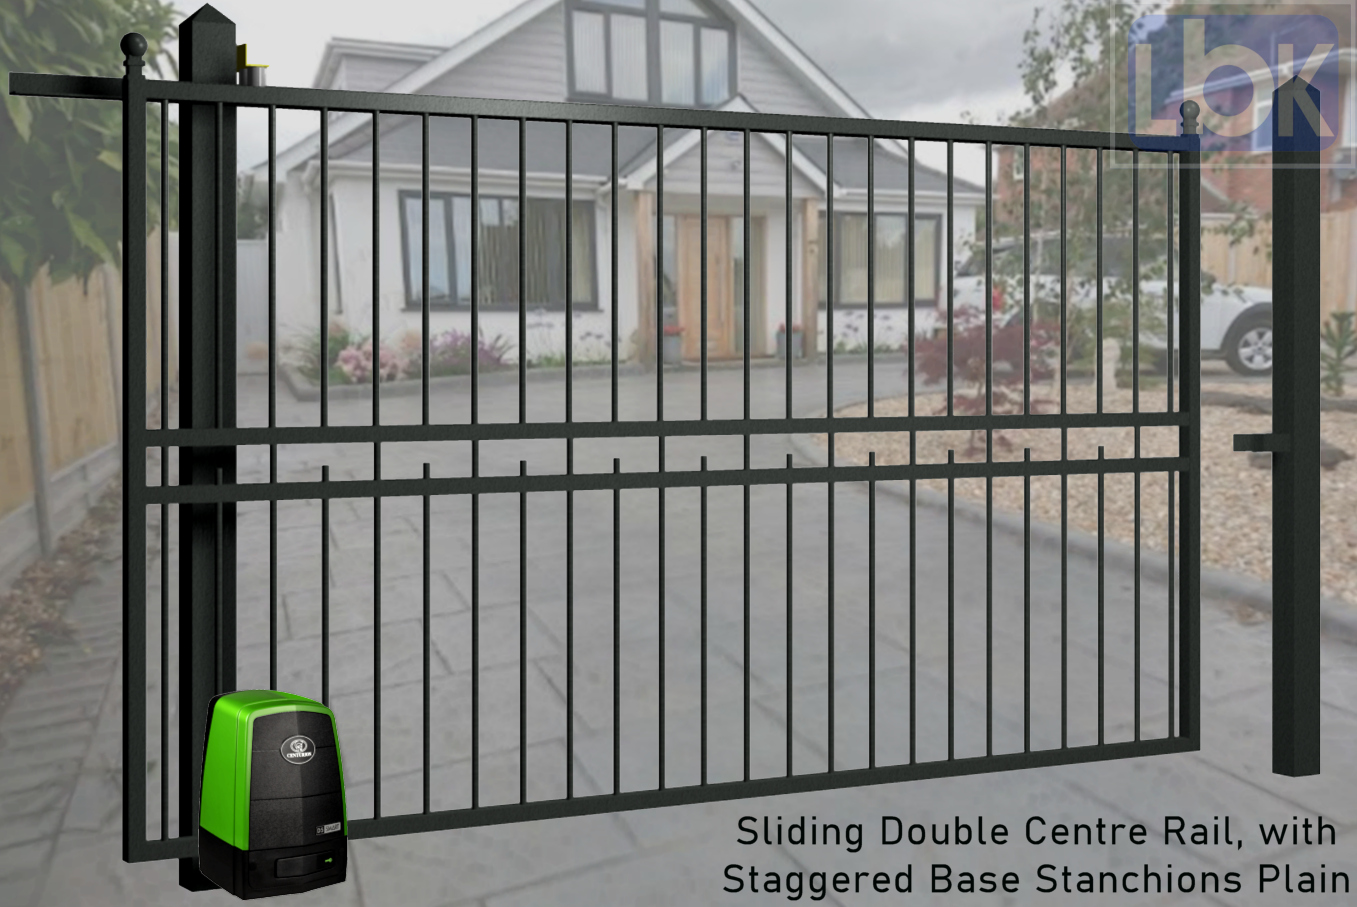 03a Sliding Double Centre Rail, with Staggered Base Stanchions Plain